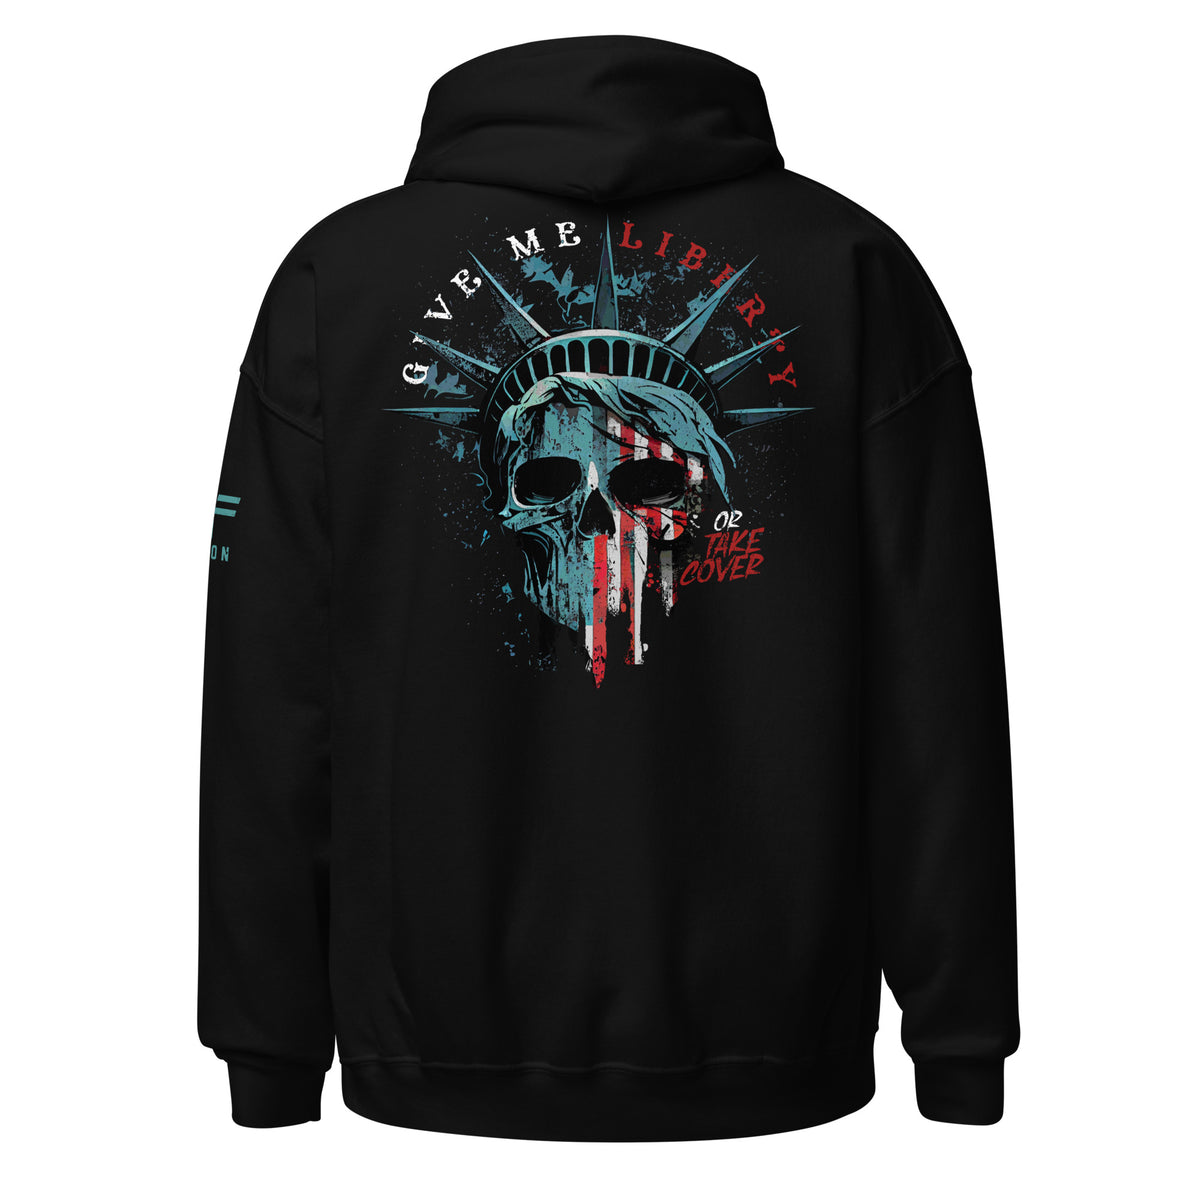 Give Me Liberty or Take Cover Hoodie